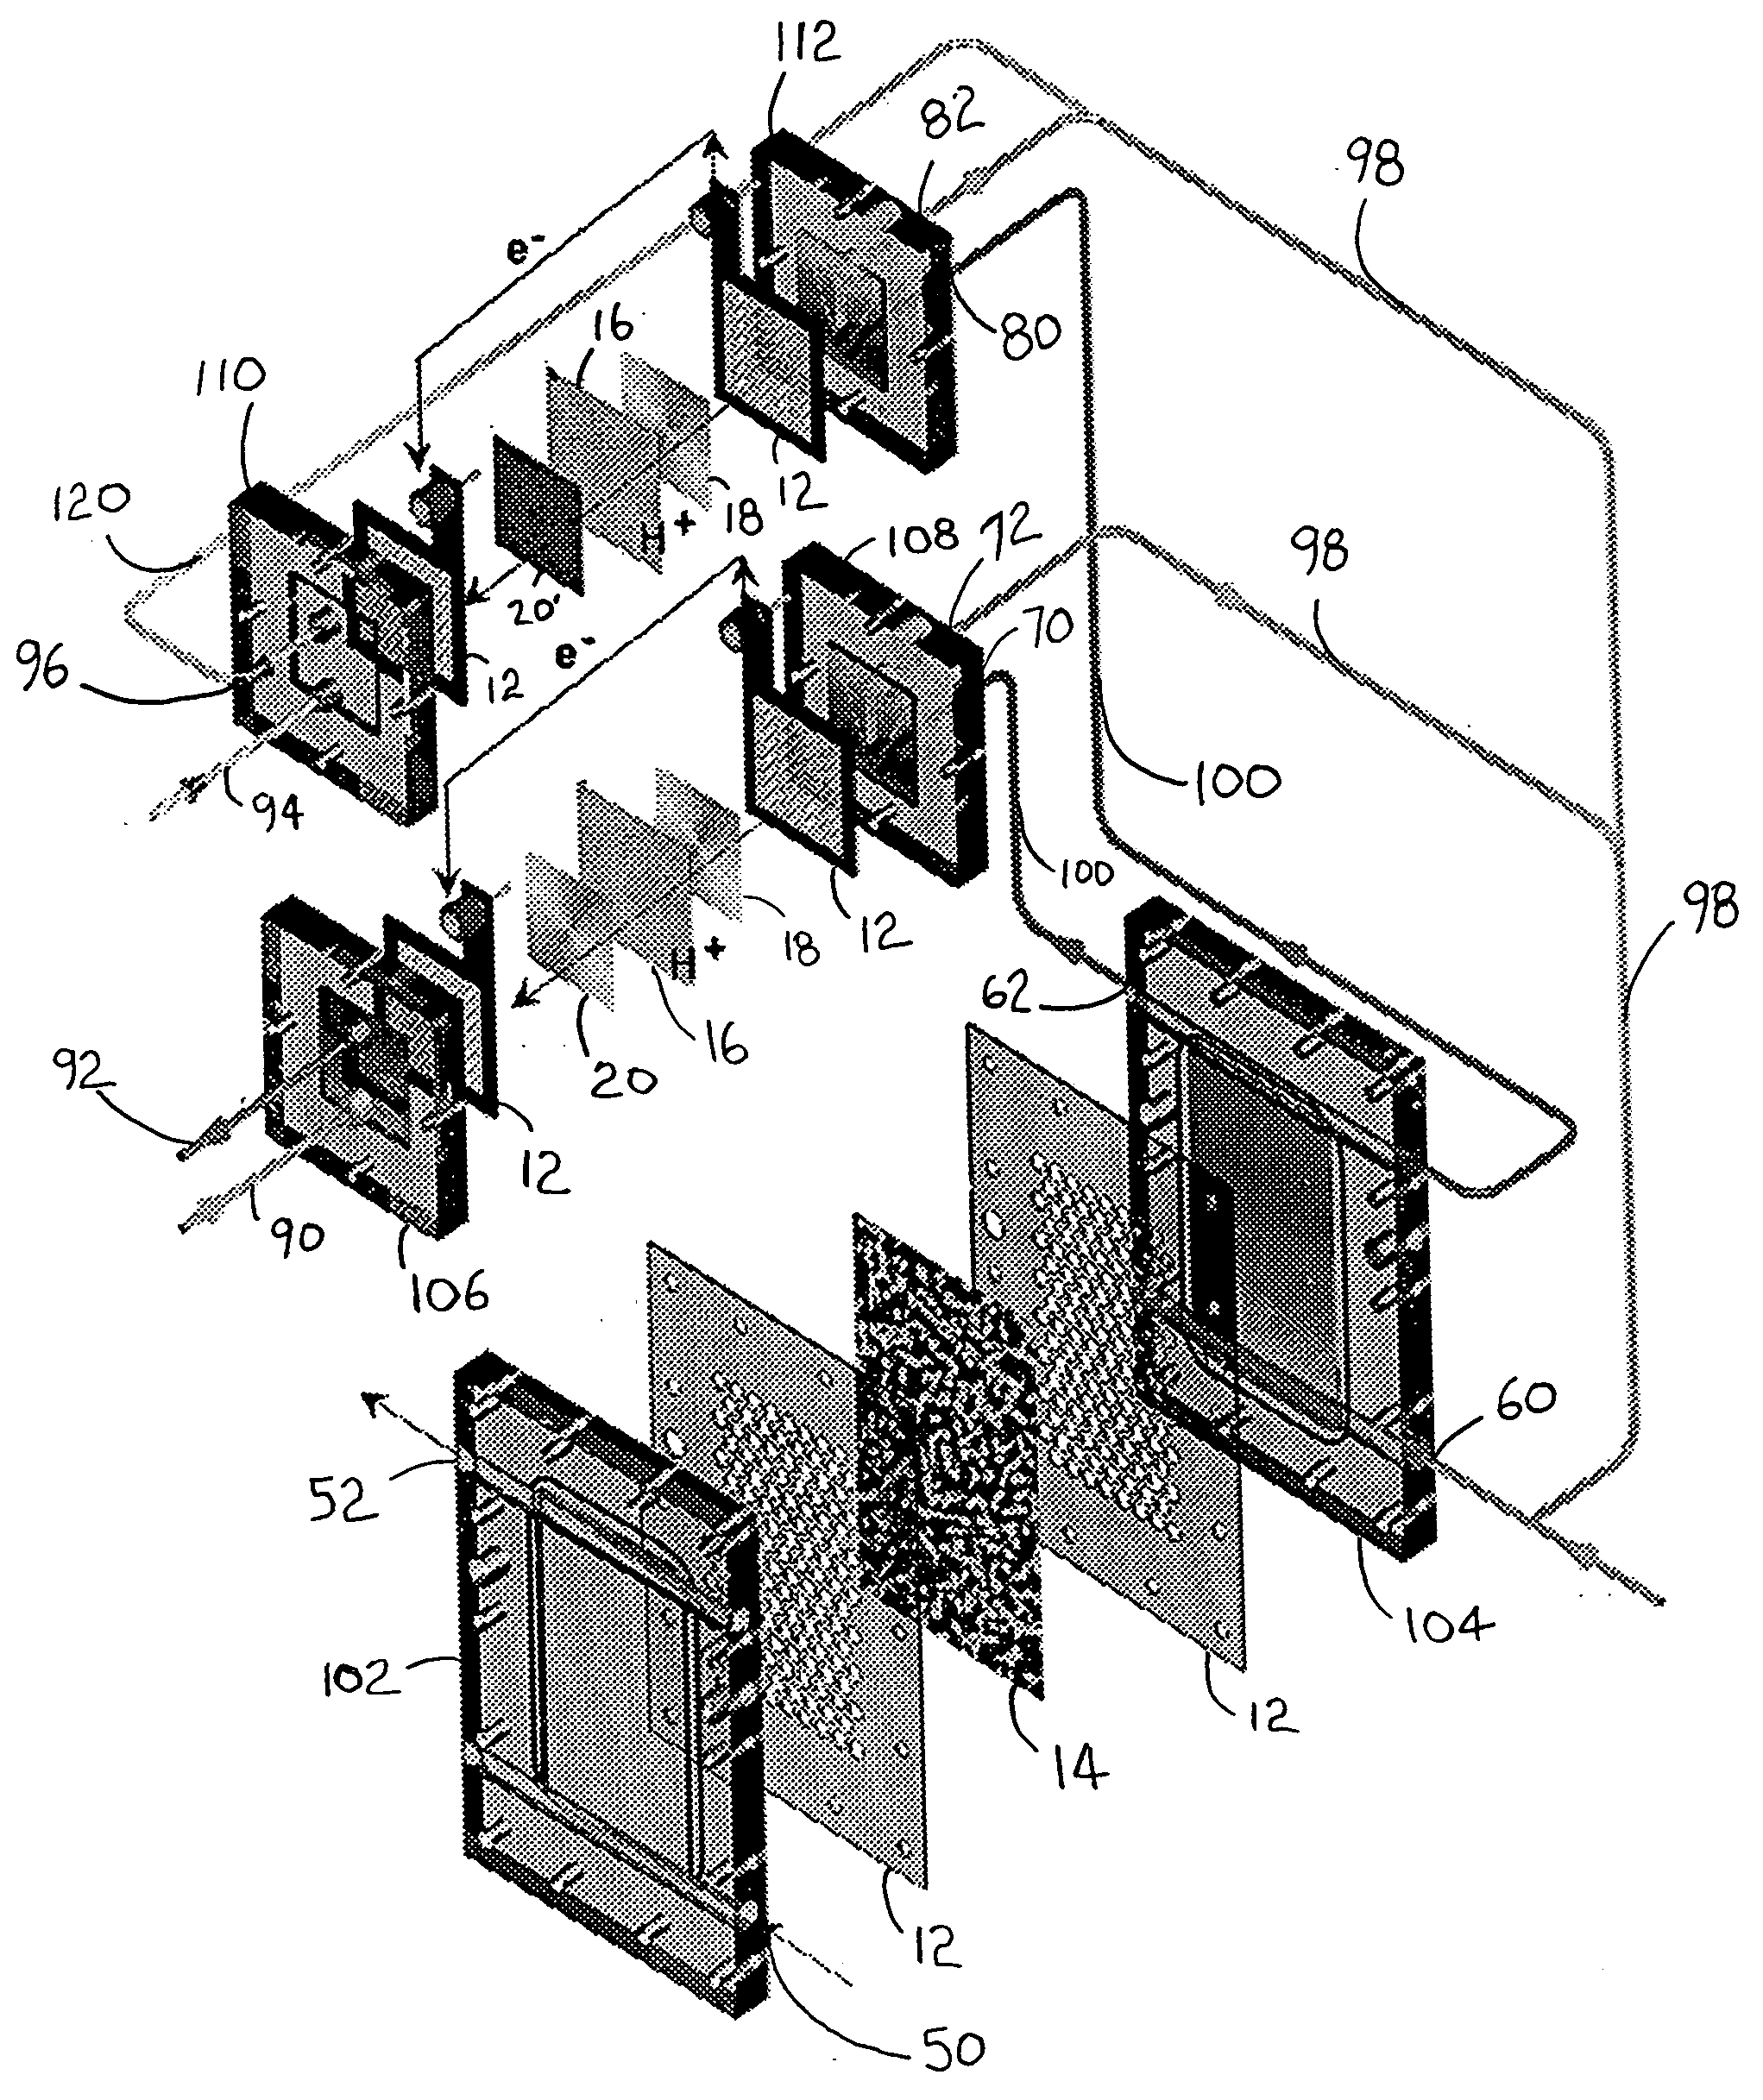 Catalytic method to remove CO and utilize its energy content in CO-containing streams